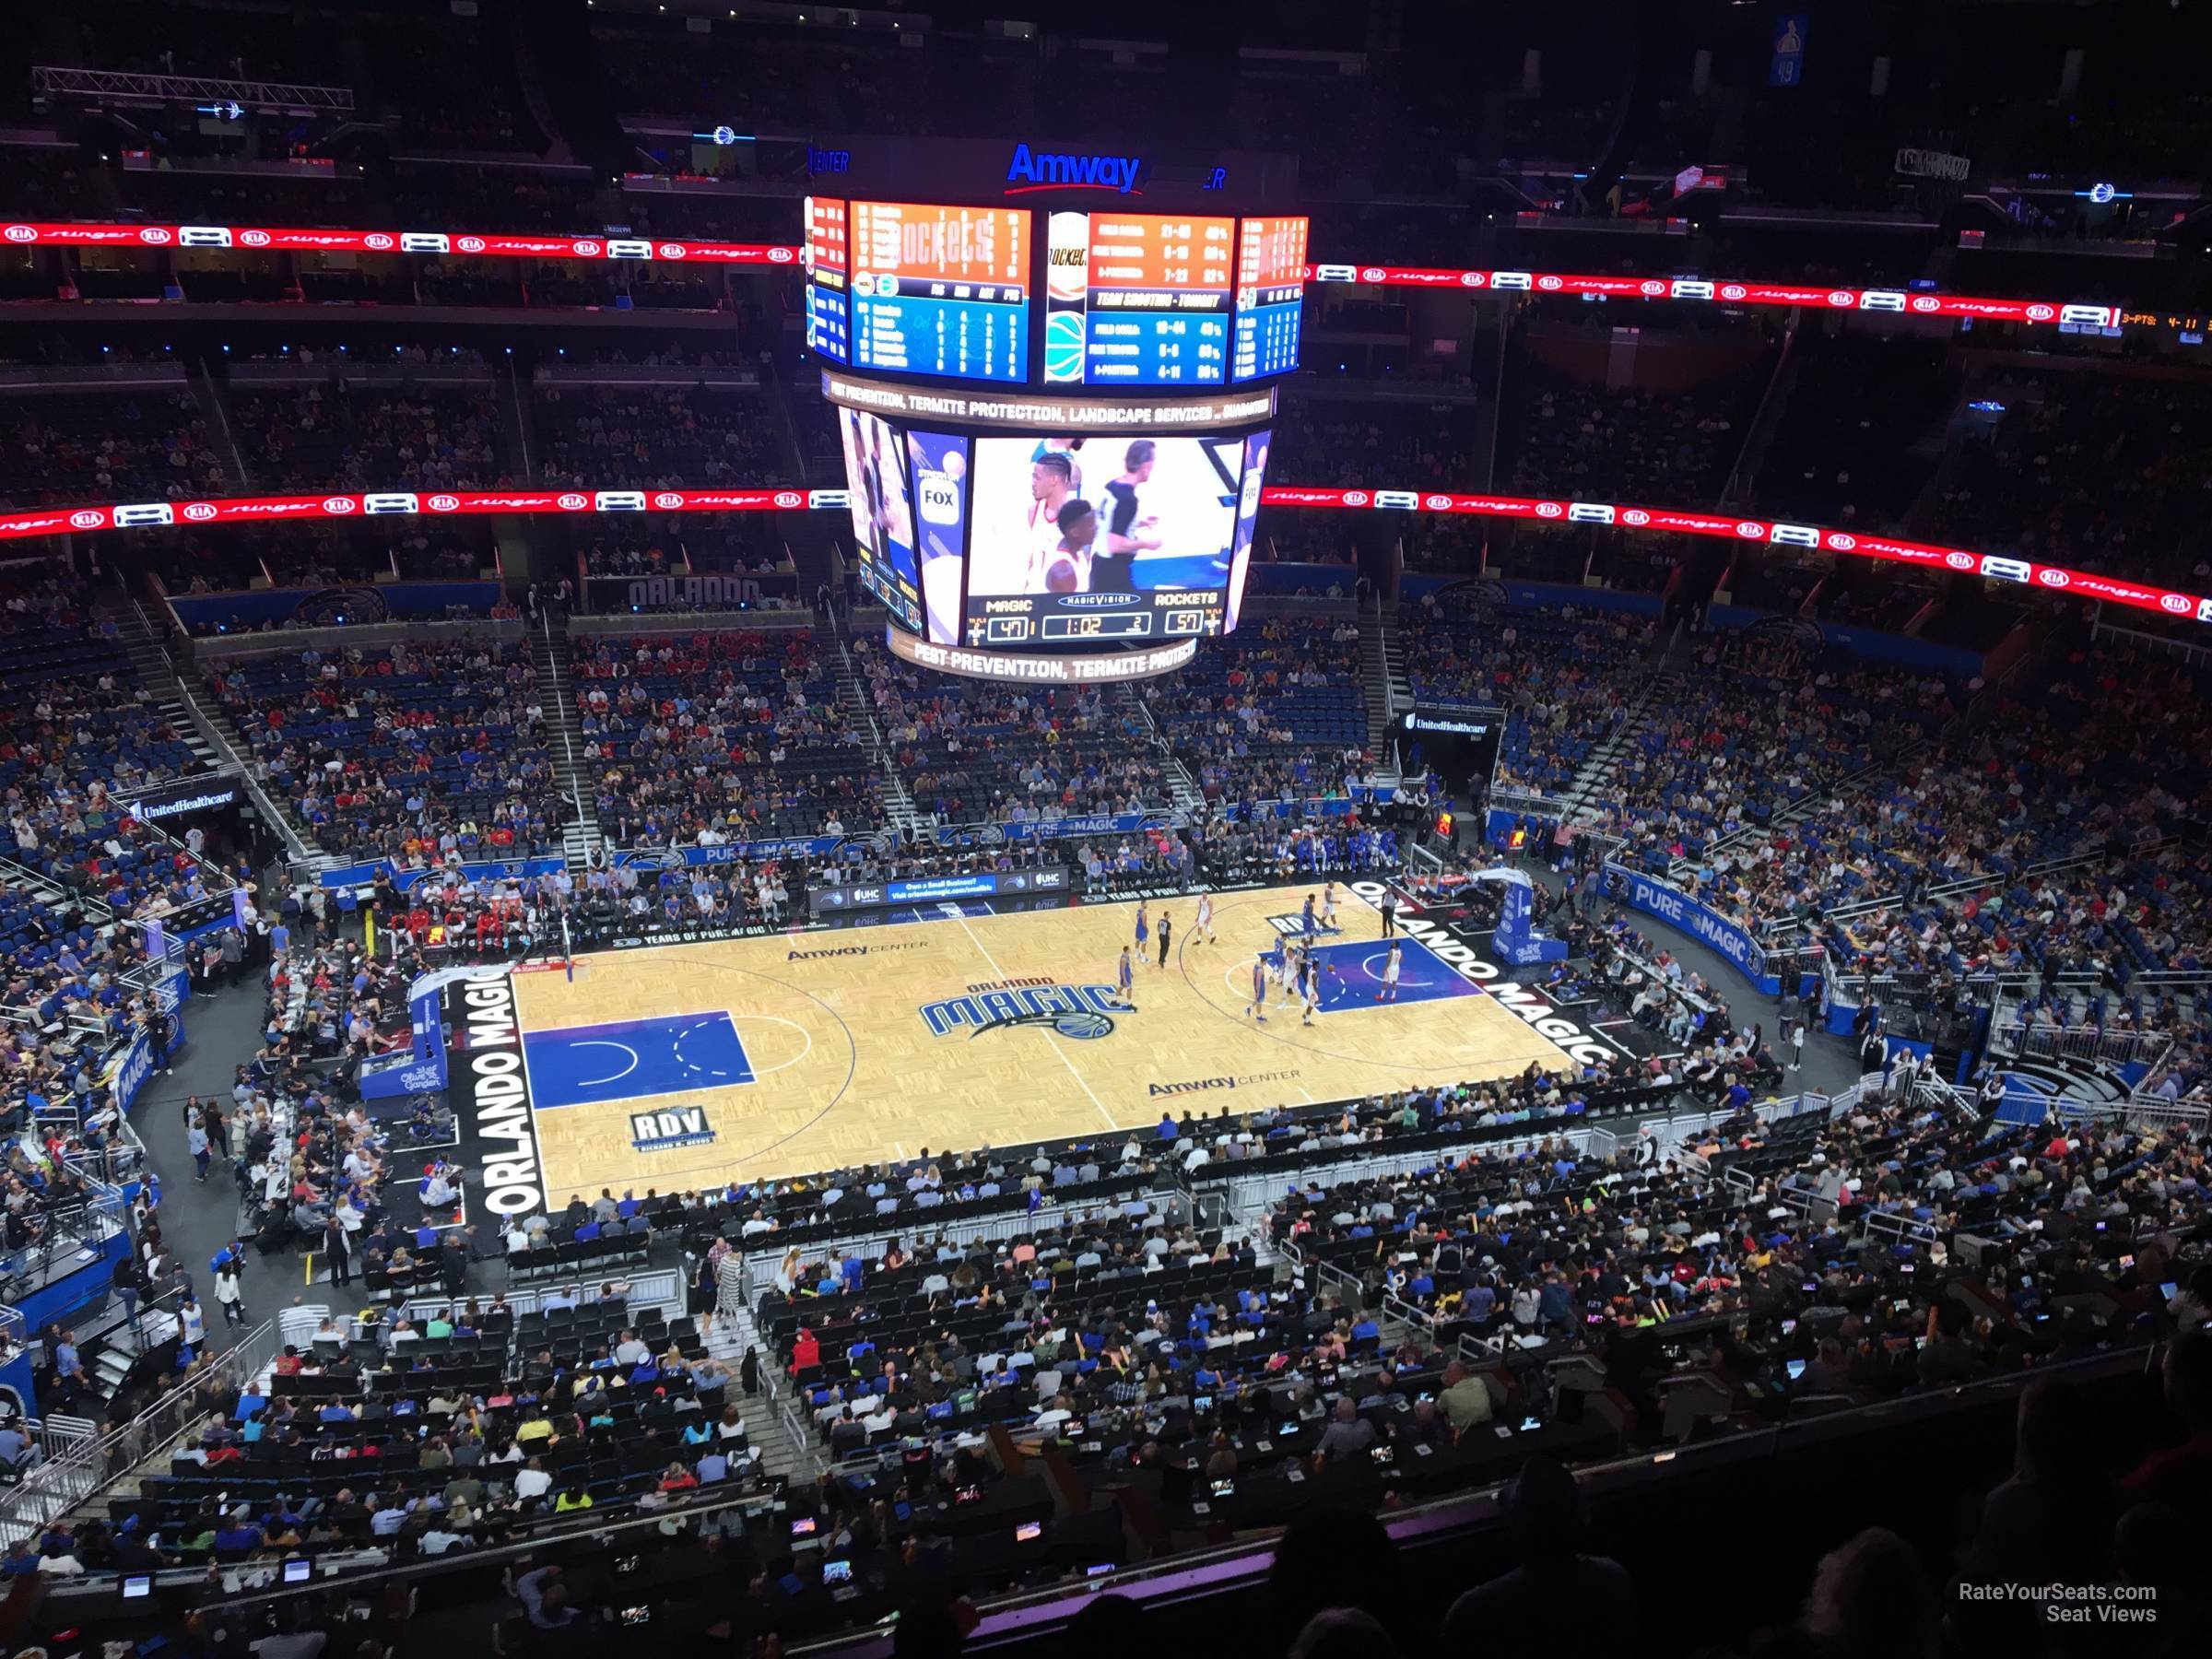 section 226, row 5 seat view  for basketball - amway center